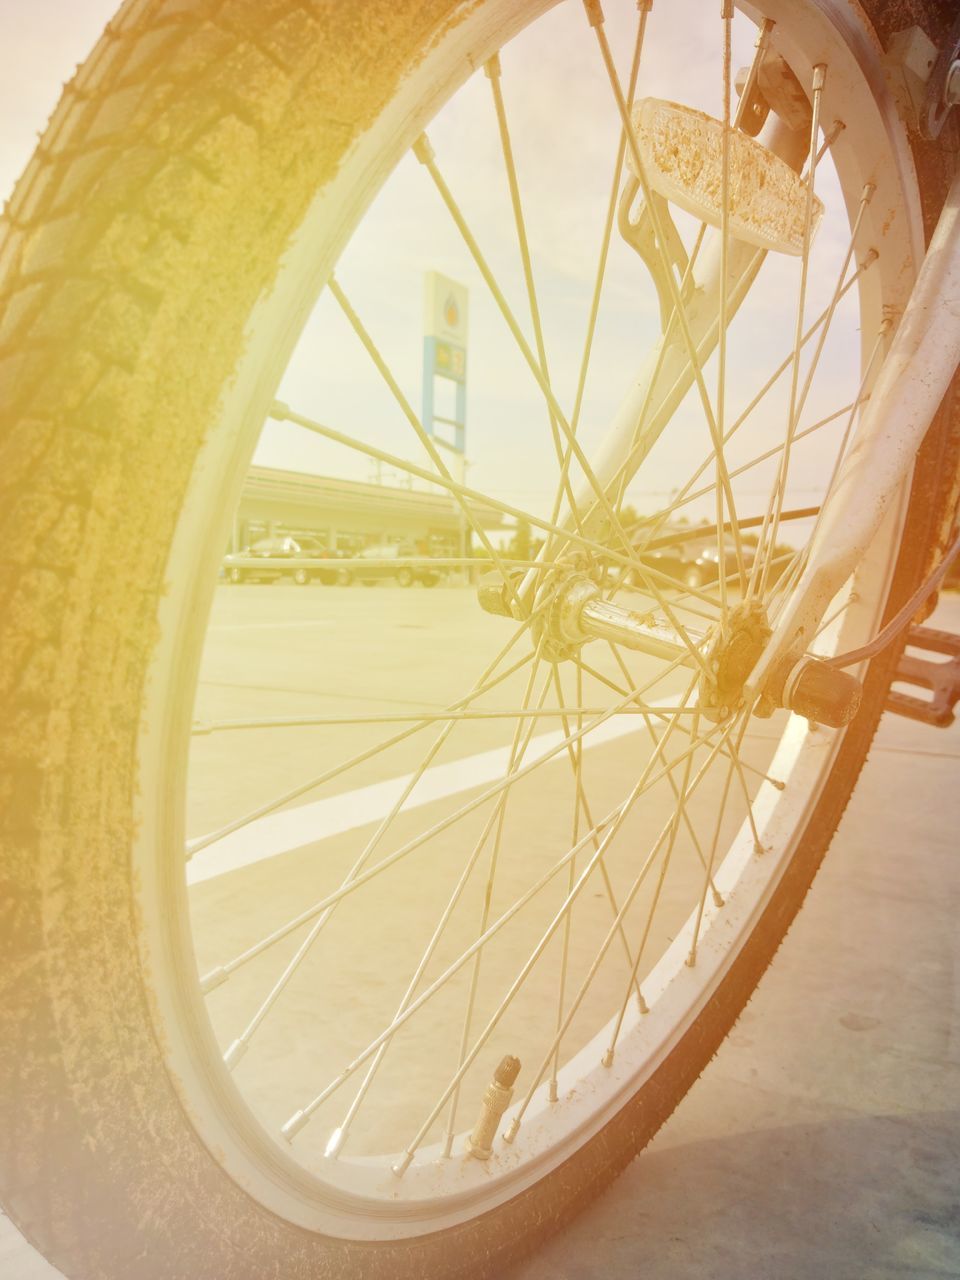 CLOSE-UP OF BICYCLE WHEEL WITH YELLOW WALL